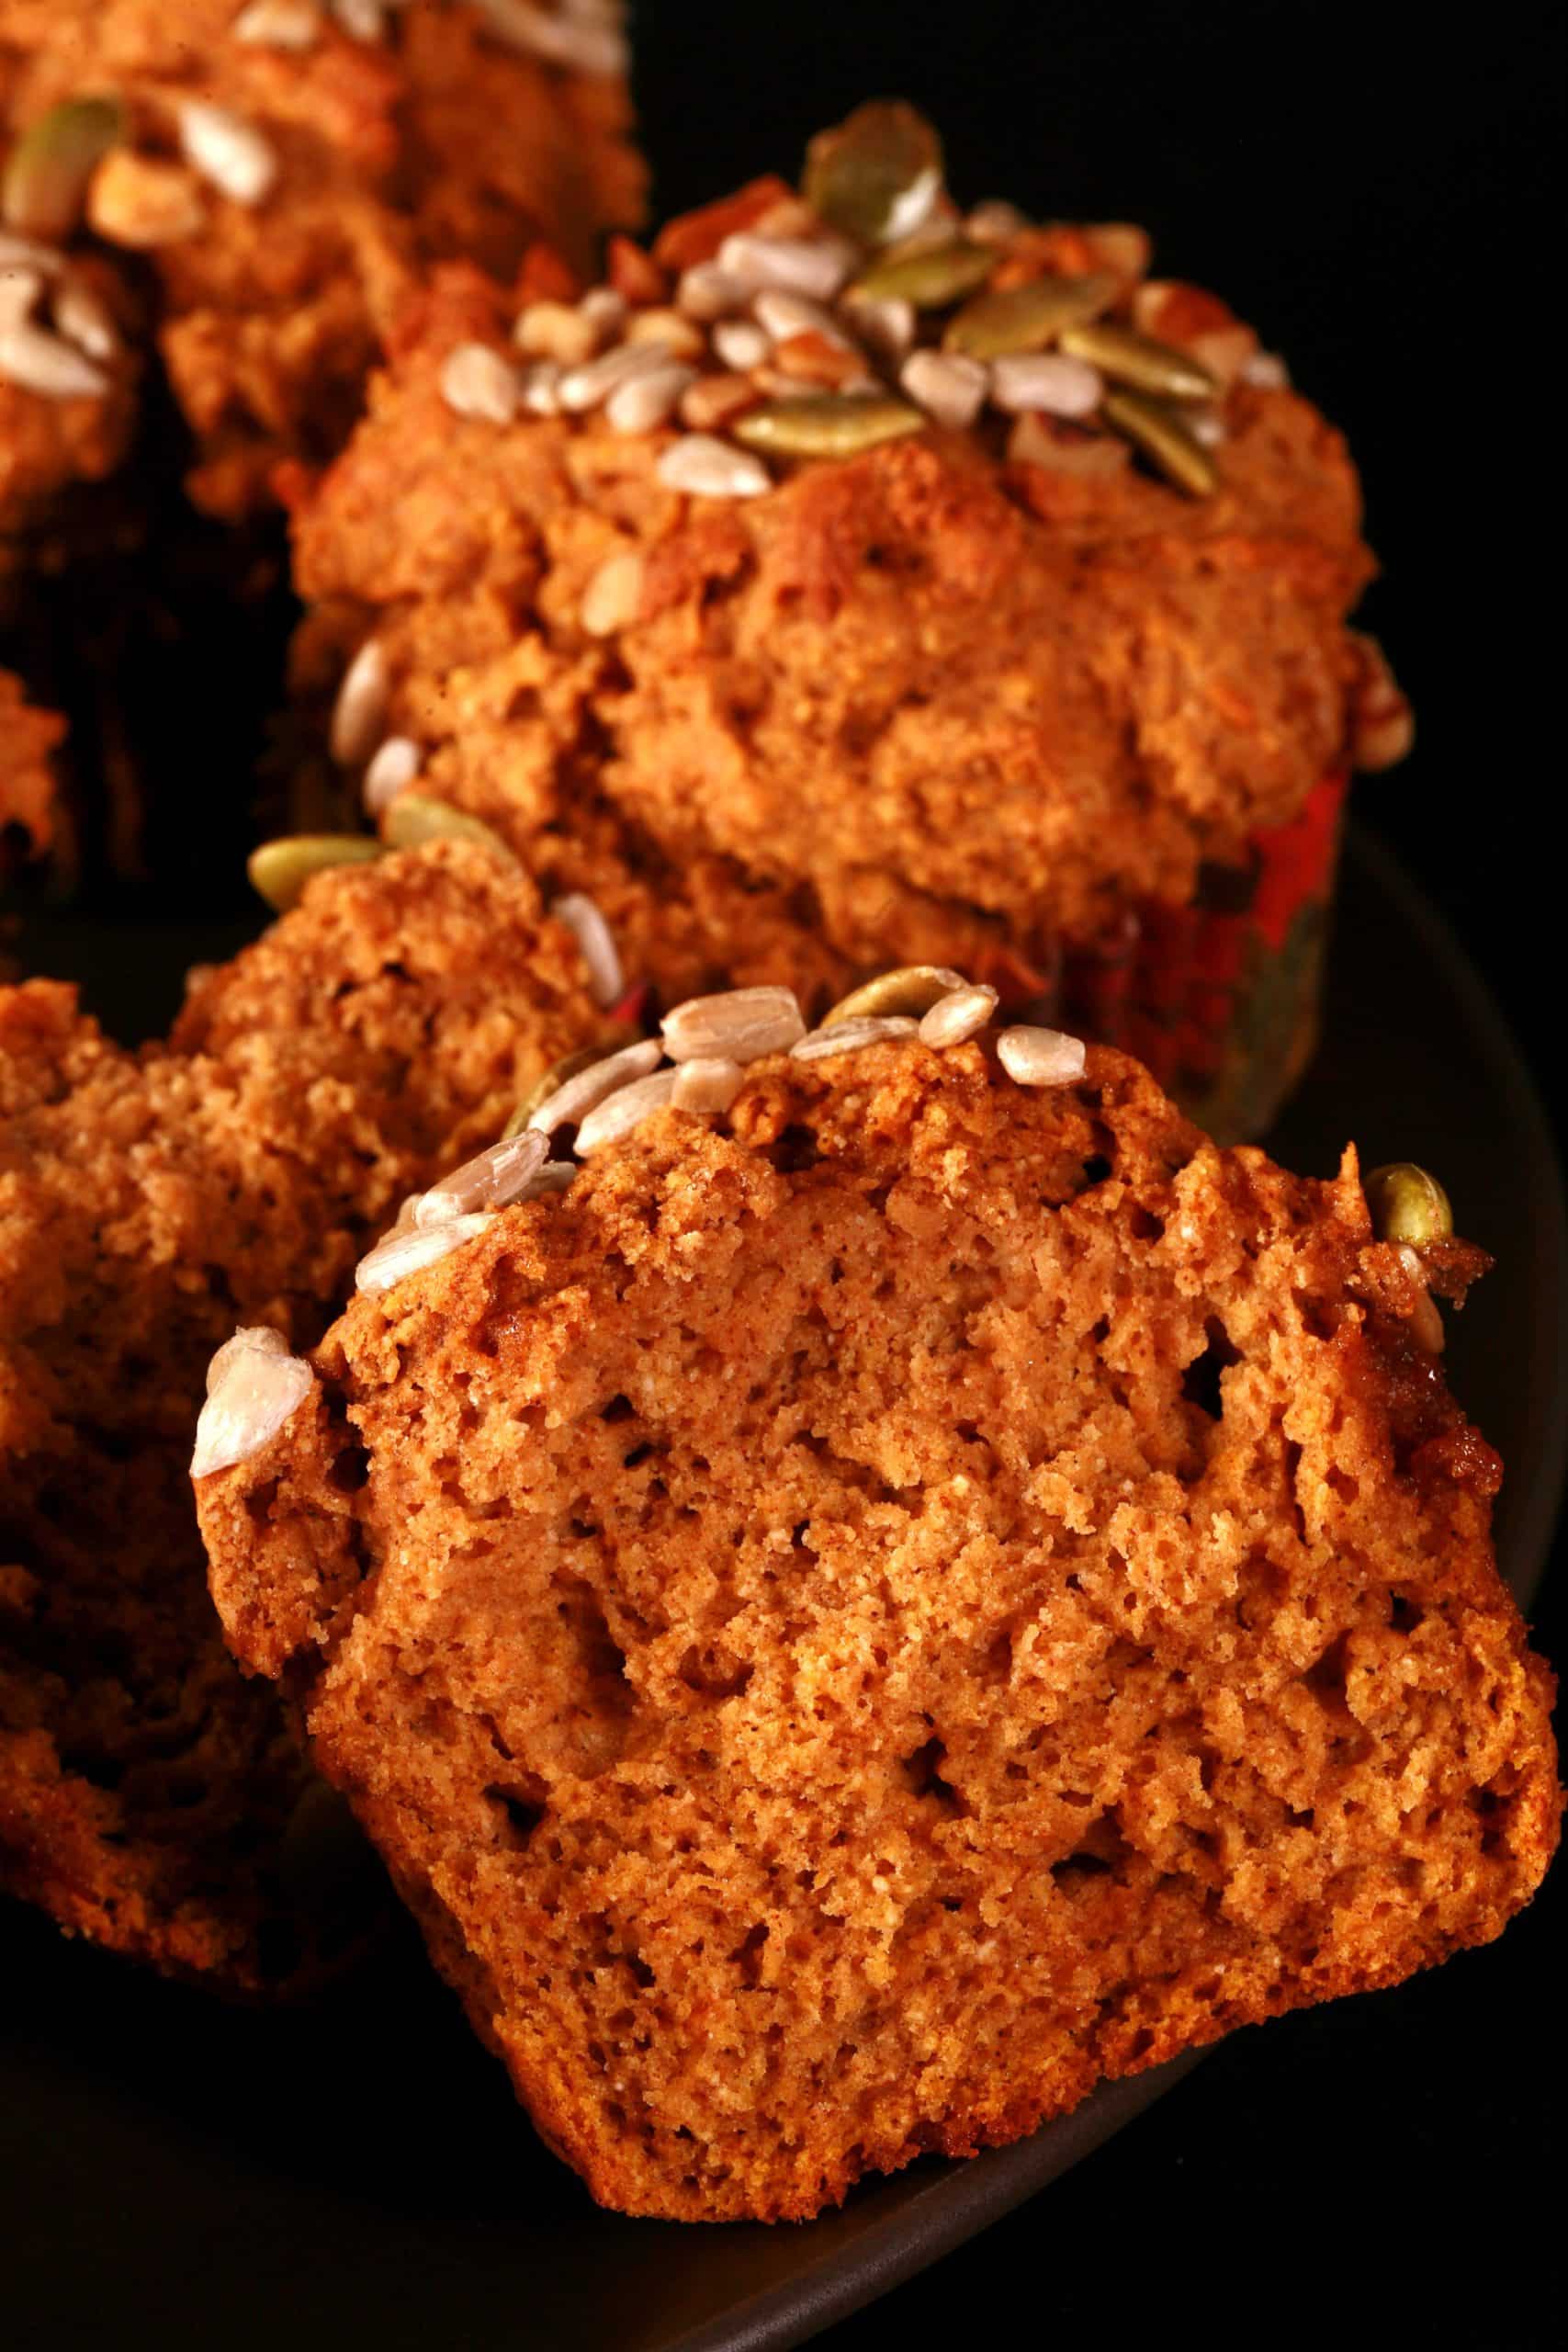 A plate of gluten free pumpkin muffins, all topped with a mix of seeds and nuts.